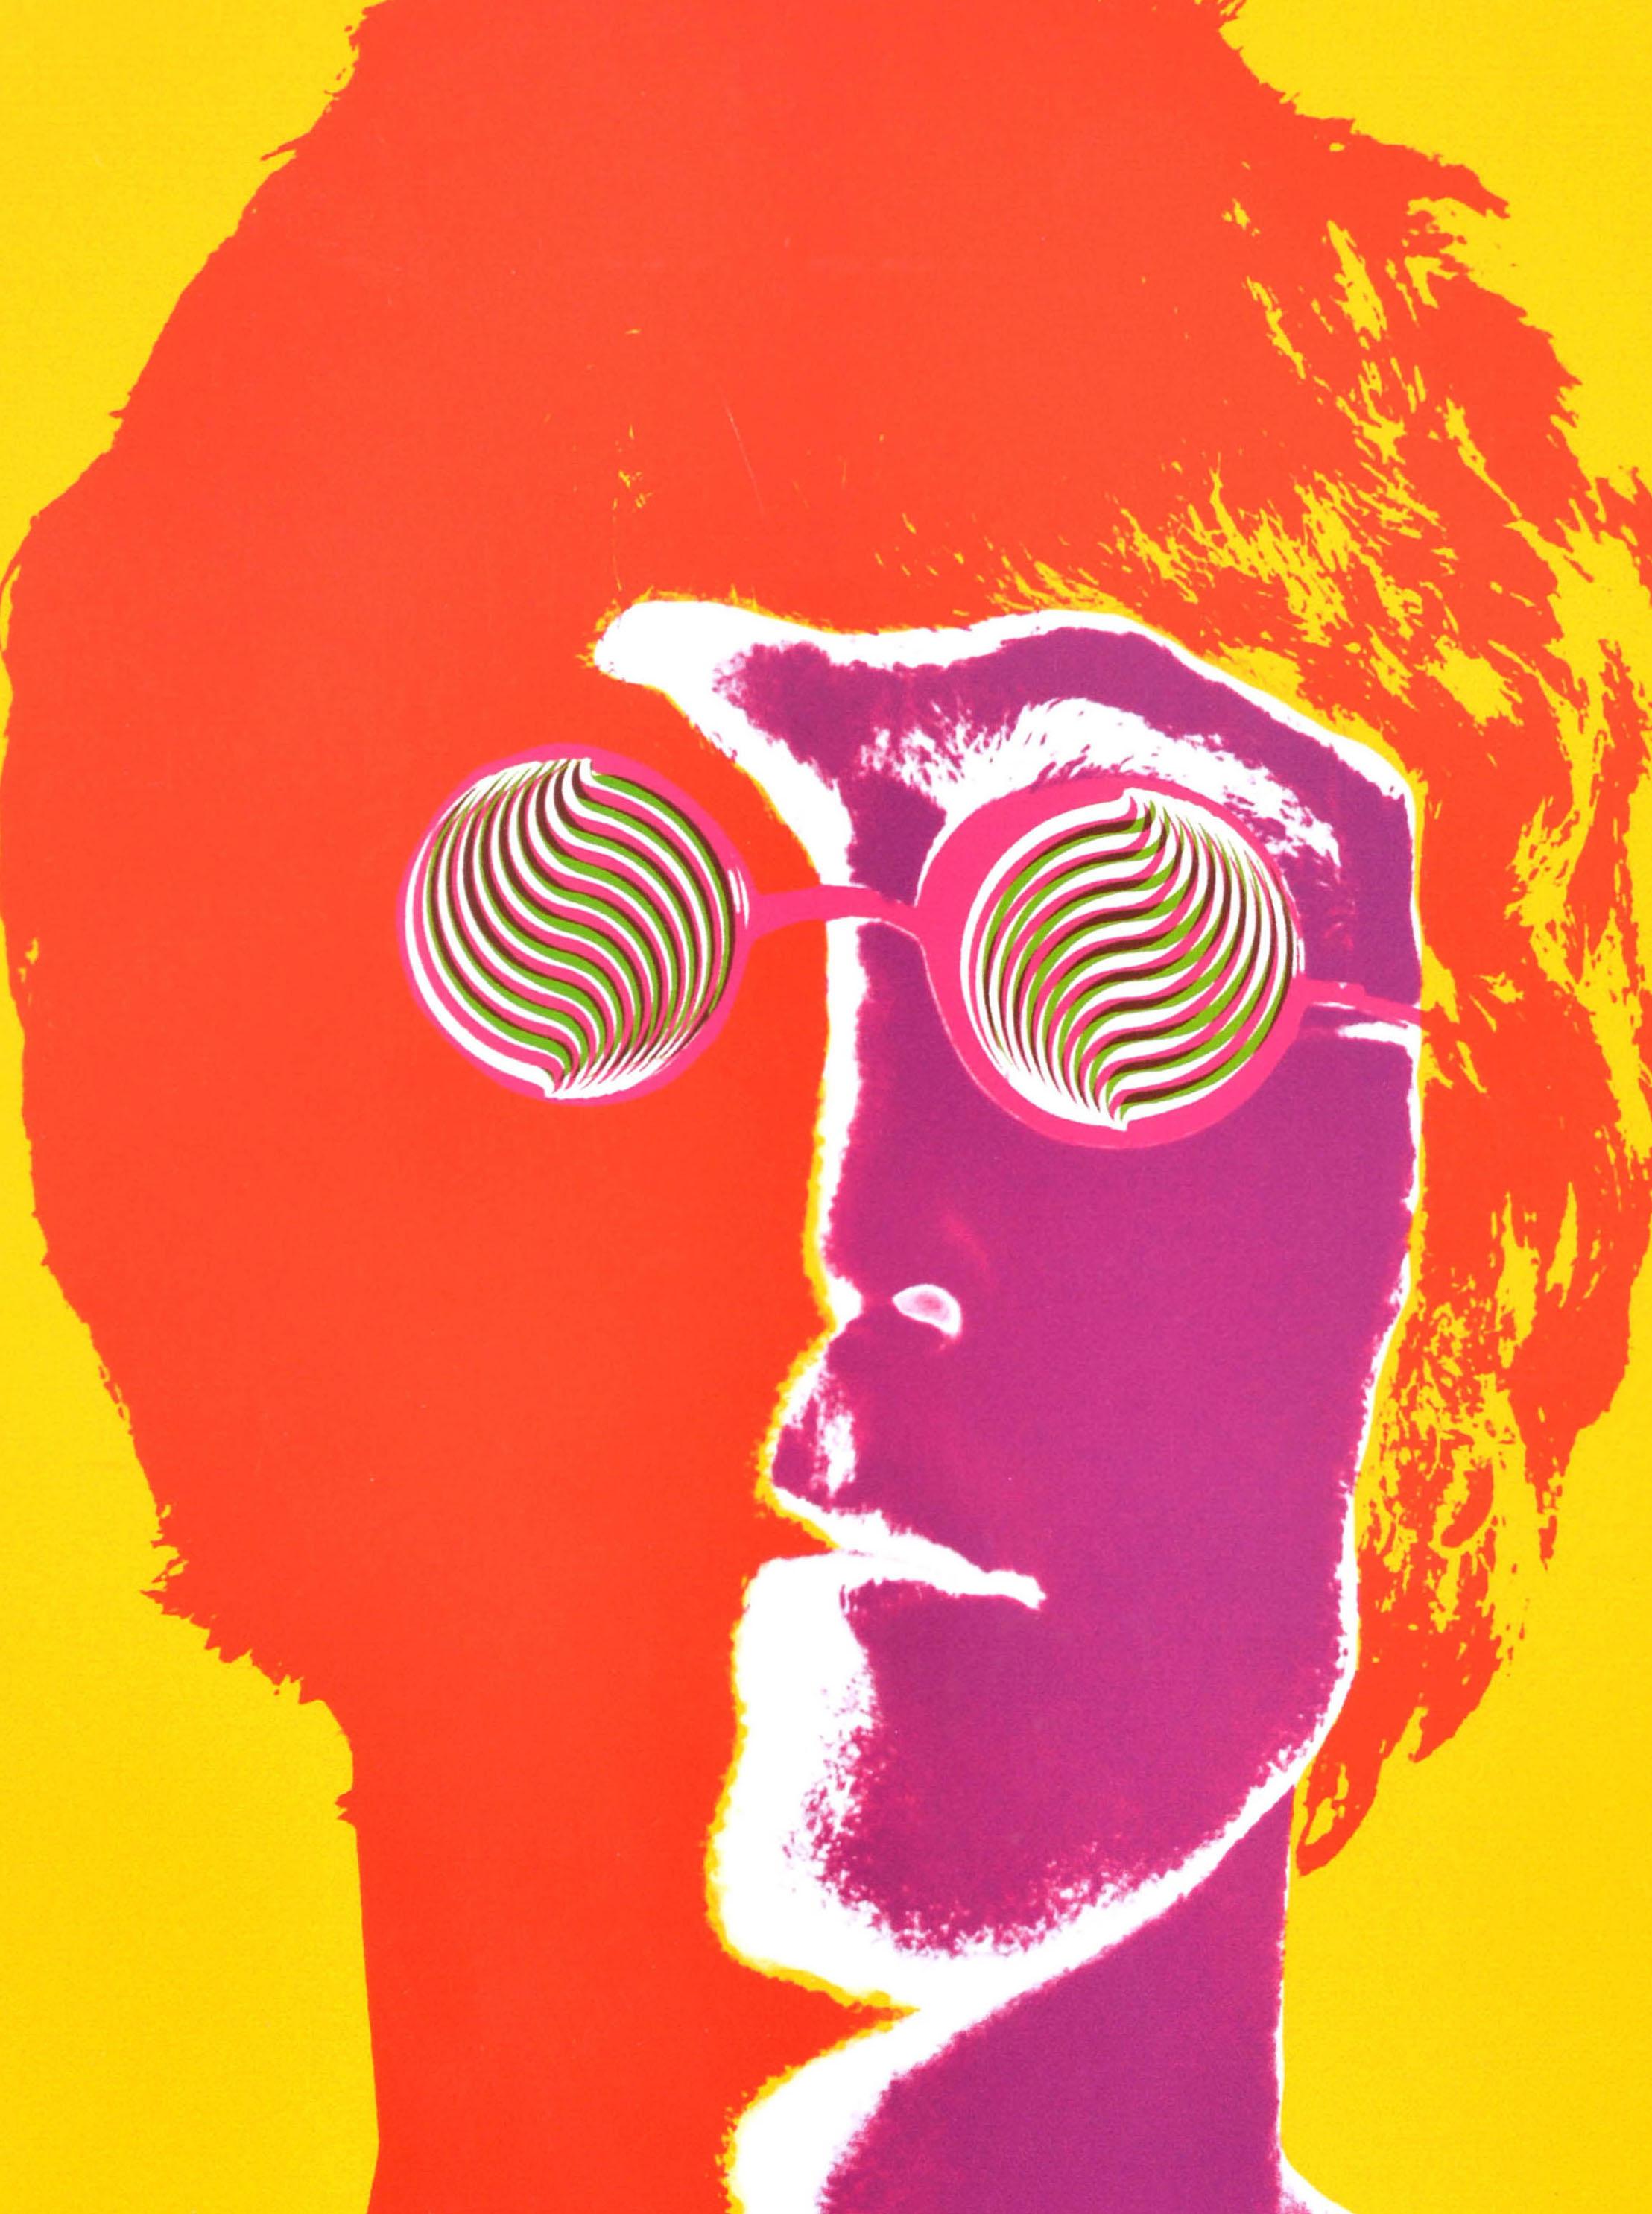 Original vintage music advertising poster featuring a colourful and psychedelic photo design using a new solarisation technique by the American photographer Richard Avedon (1923-2004) of the Beatles musician and singer songwriter John Lennon (John